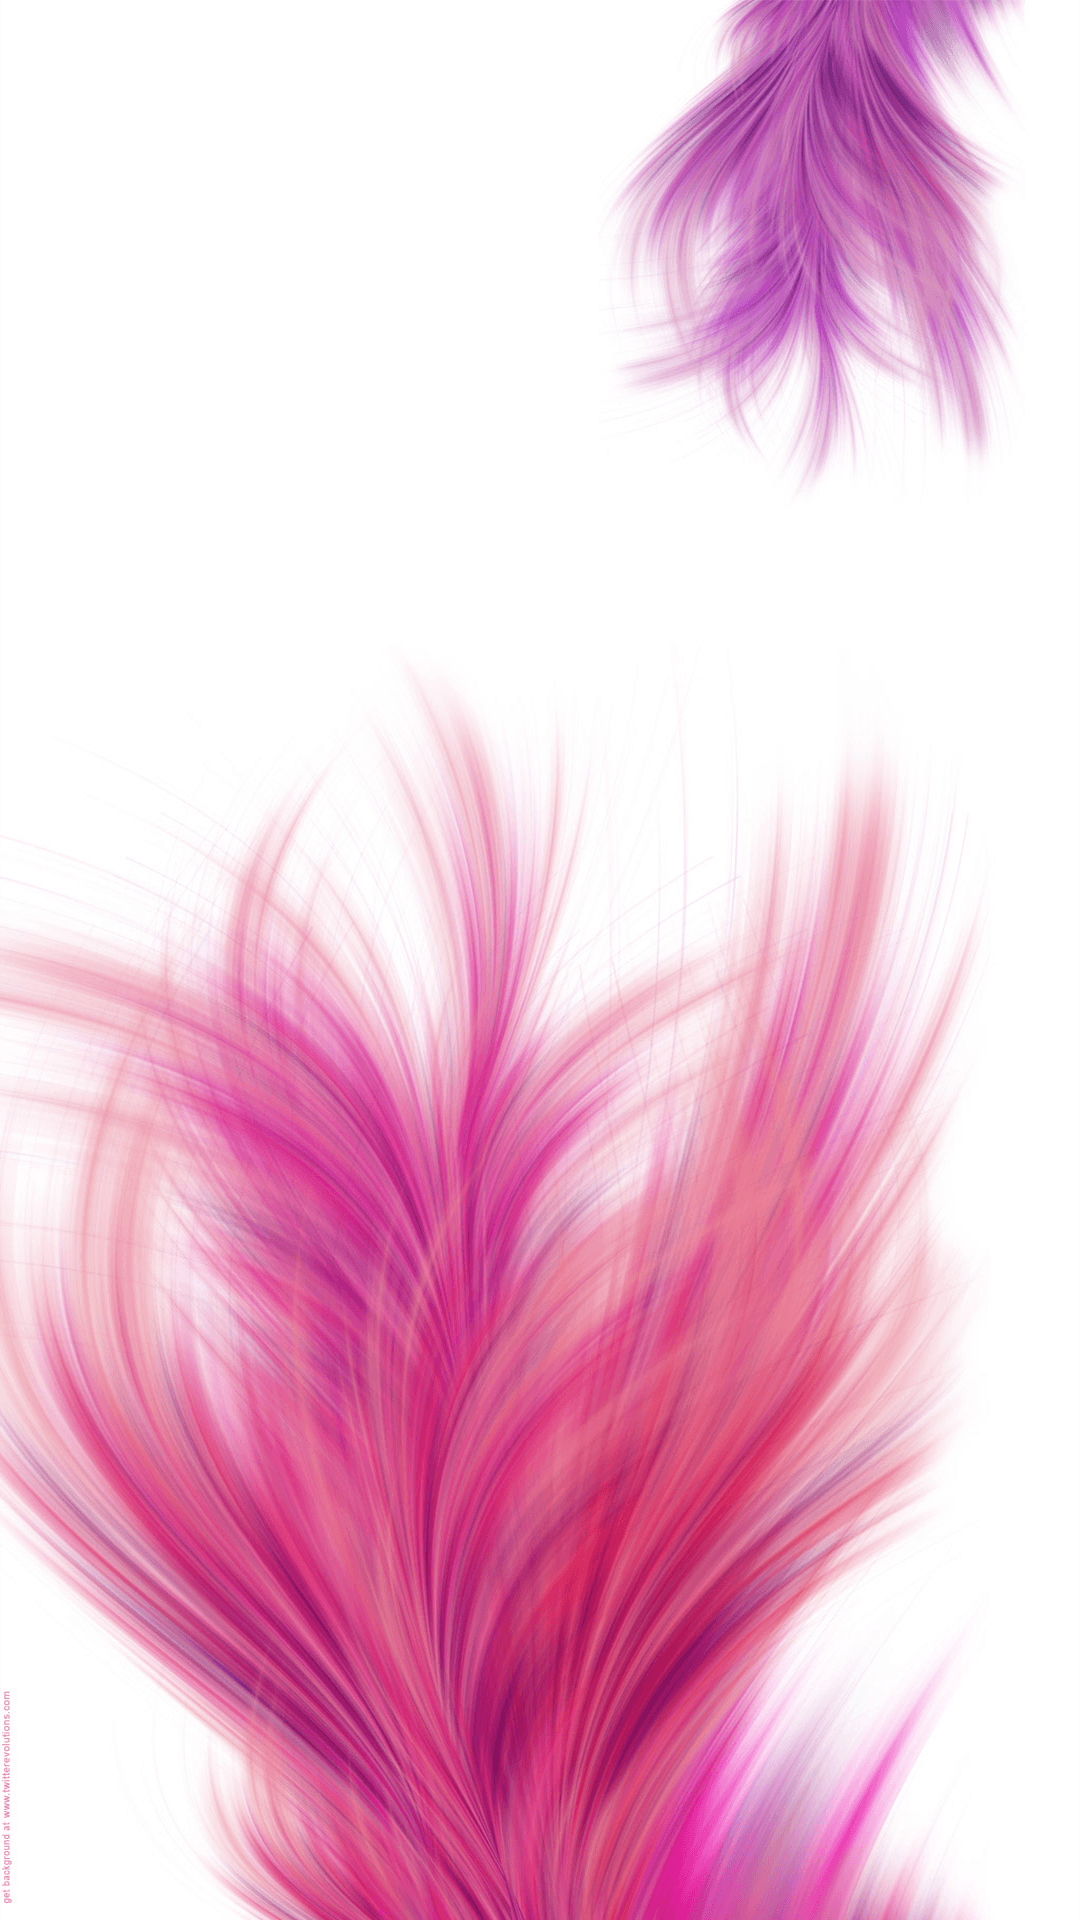 Ultra HD Fluffy Feathers Wallpaper For Your Mobile Phone .0389